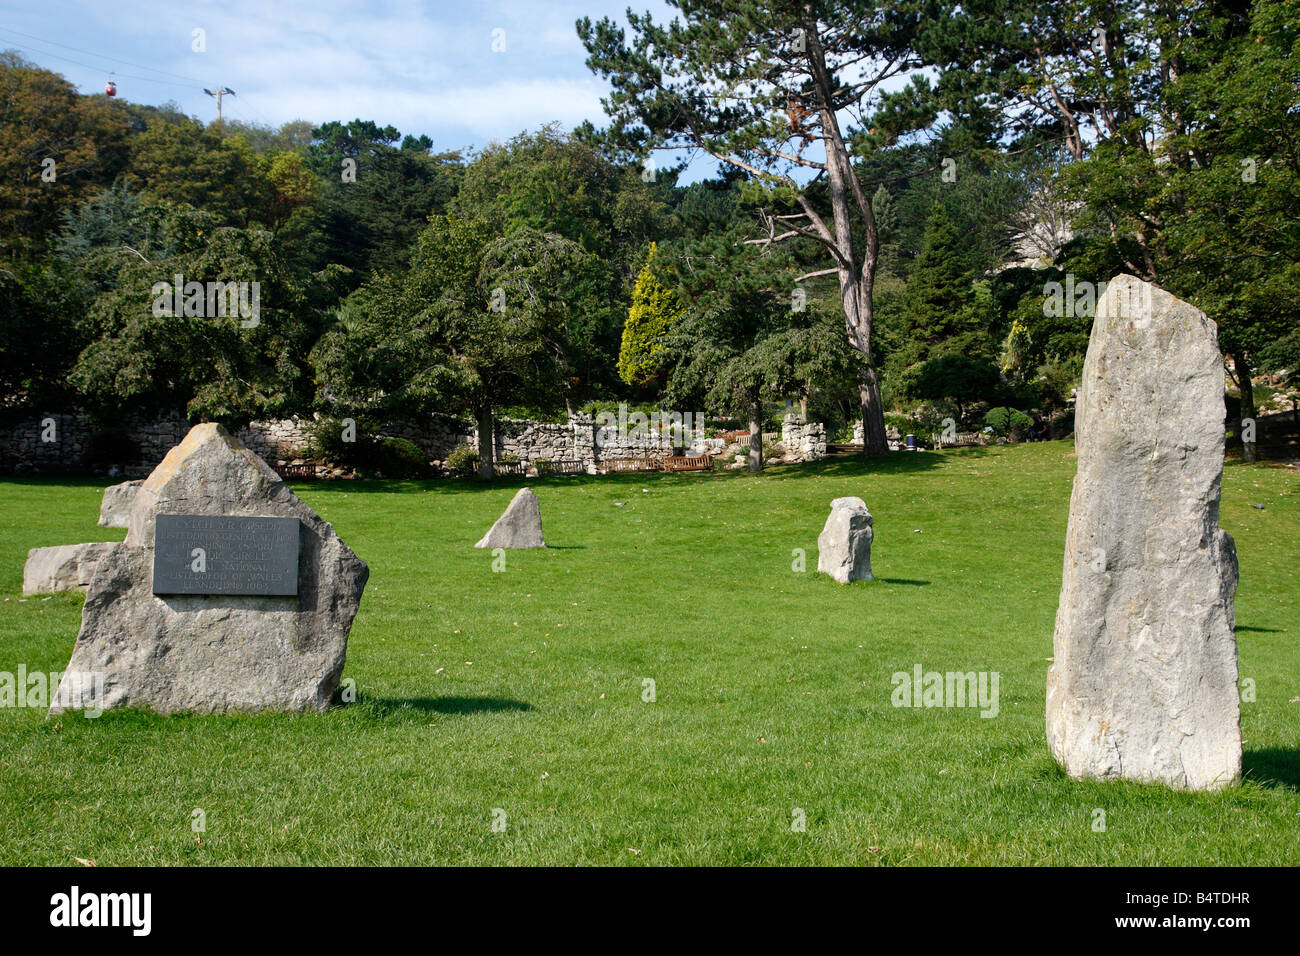 happy valley gardens stone circle constructed for the national eisteddfod llandudno wales uk Stock Photo